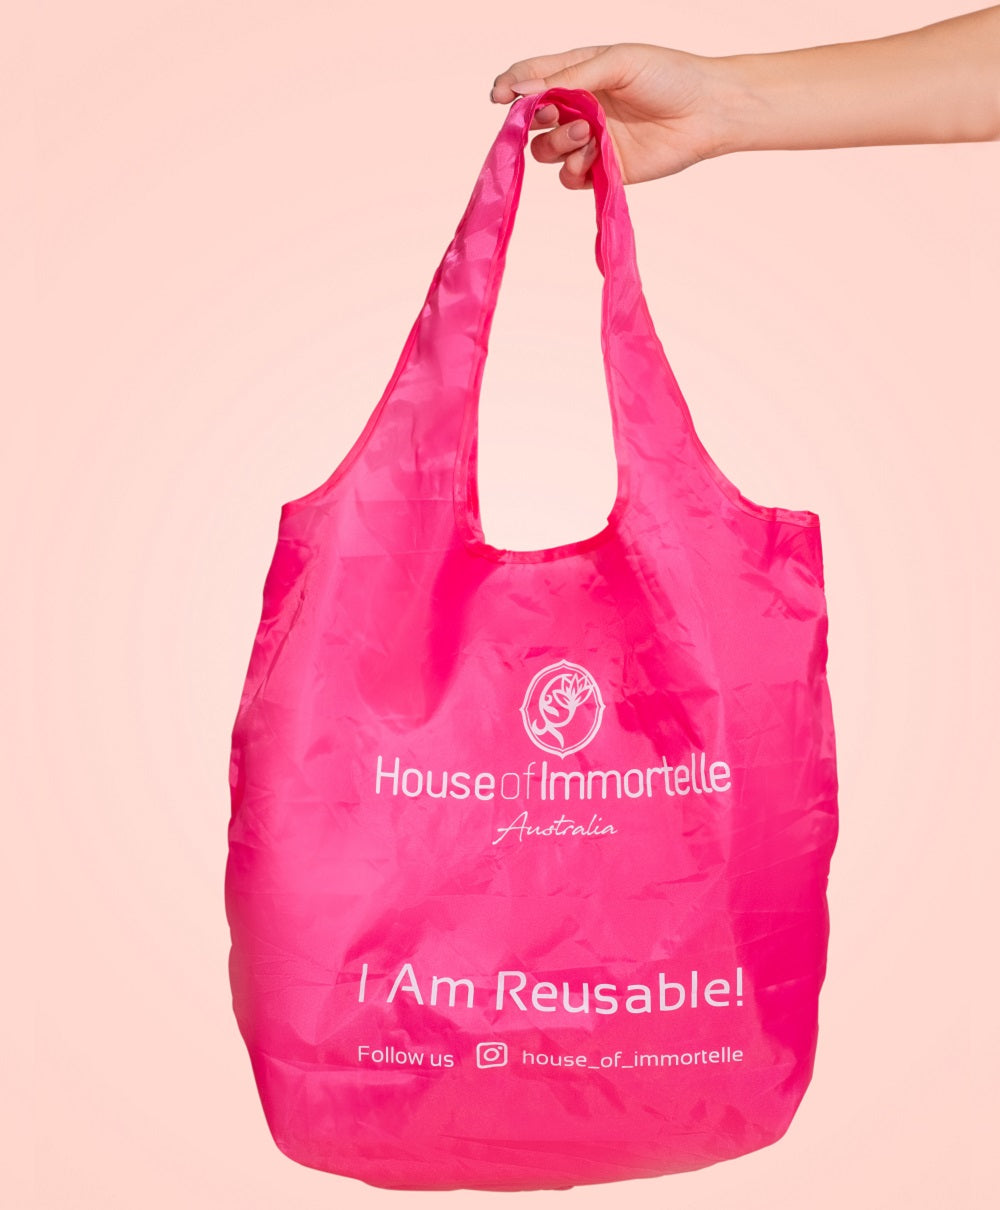 Reusable Shopping Tote Bags Online in Australia